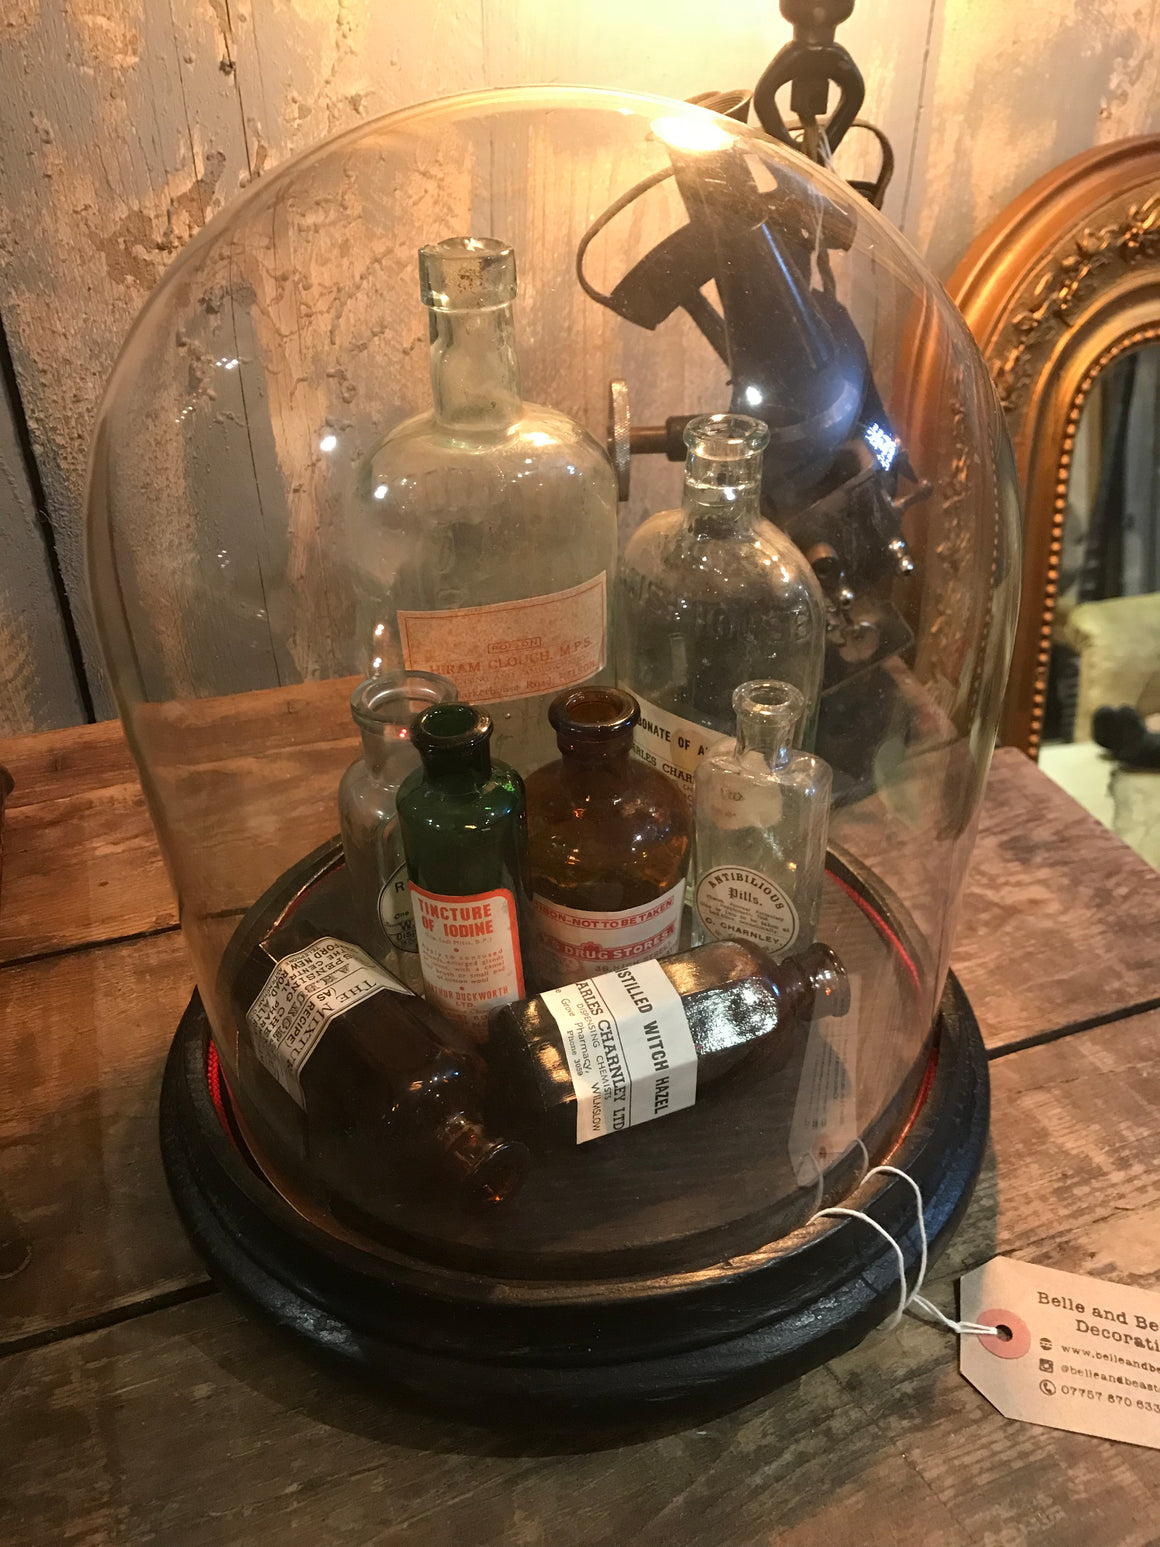 A collection of apothecary bottles and jars under a glass dome